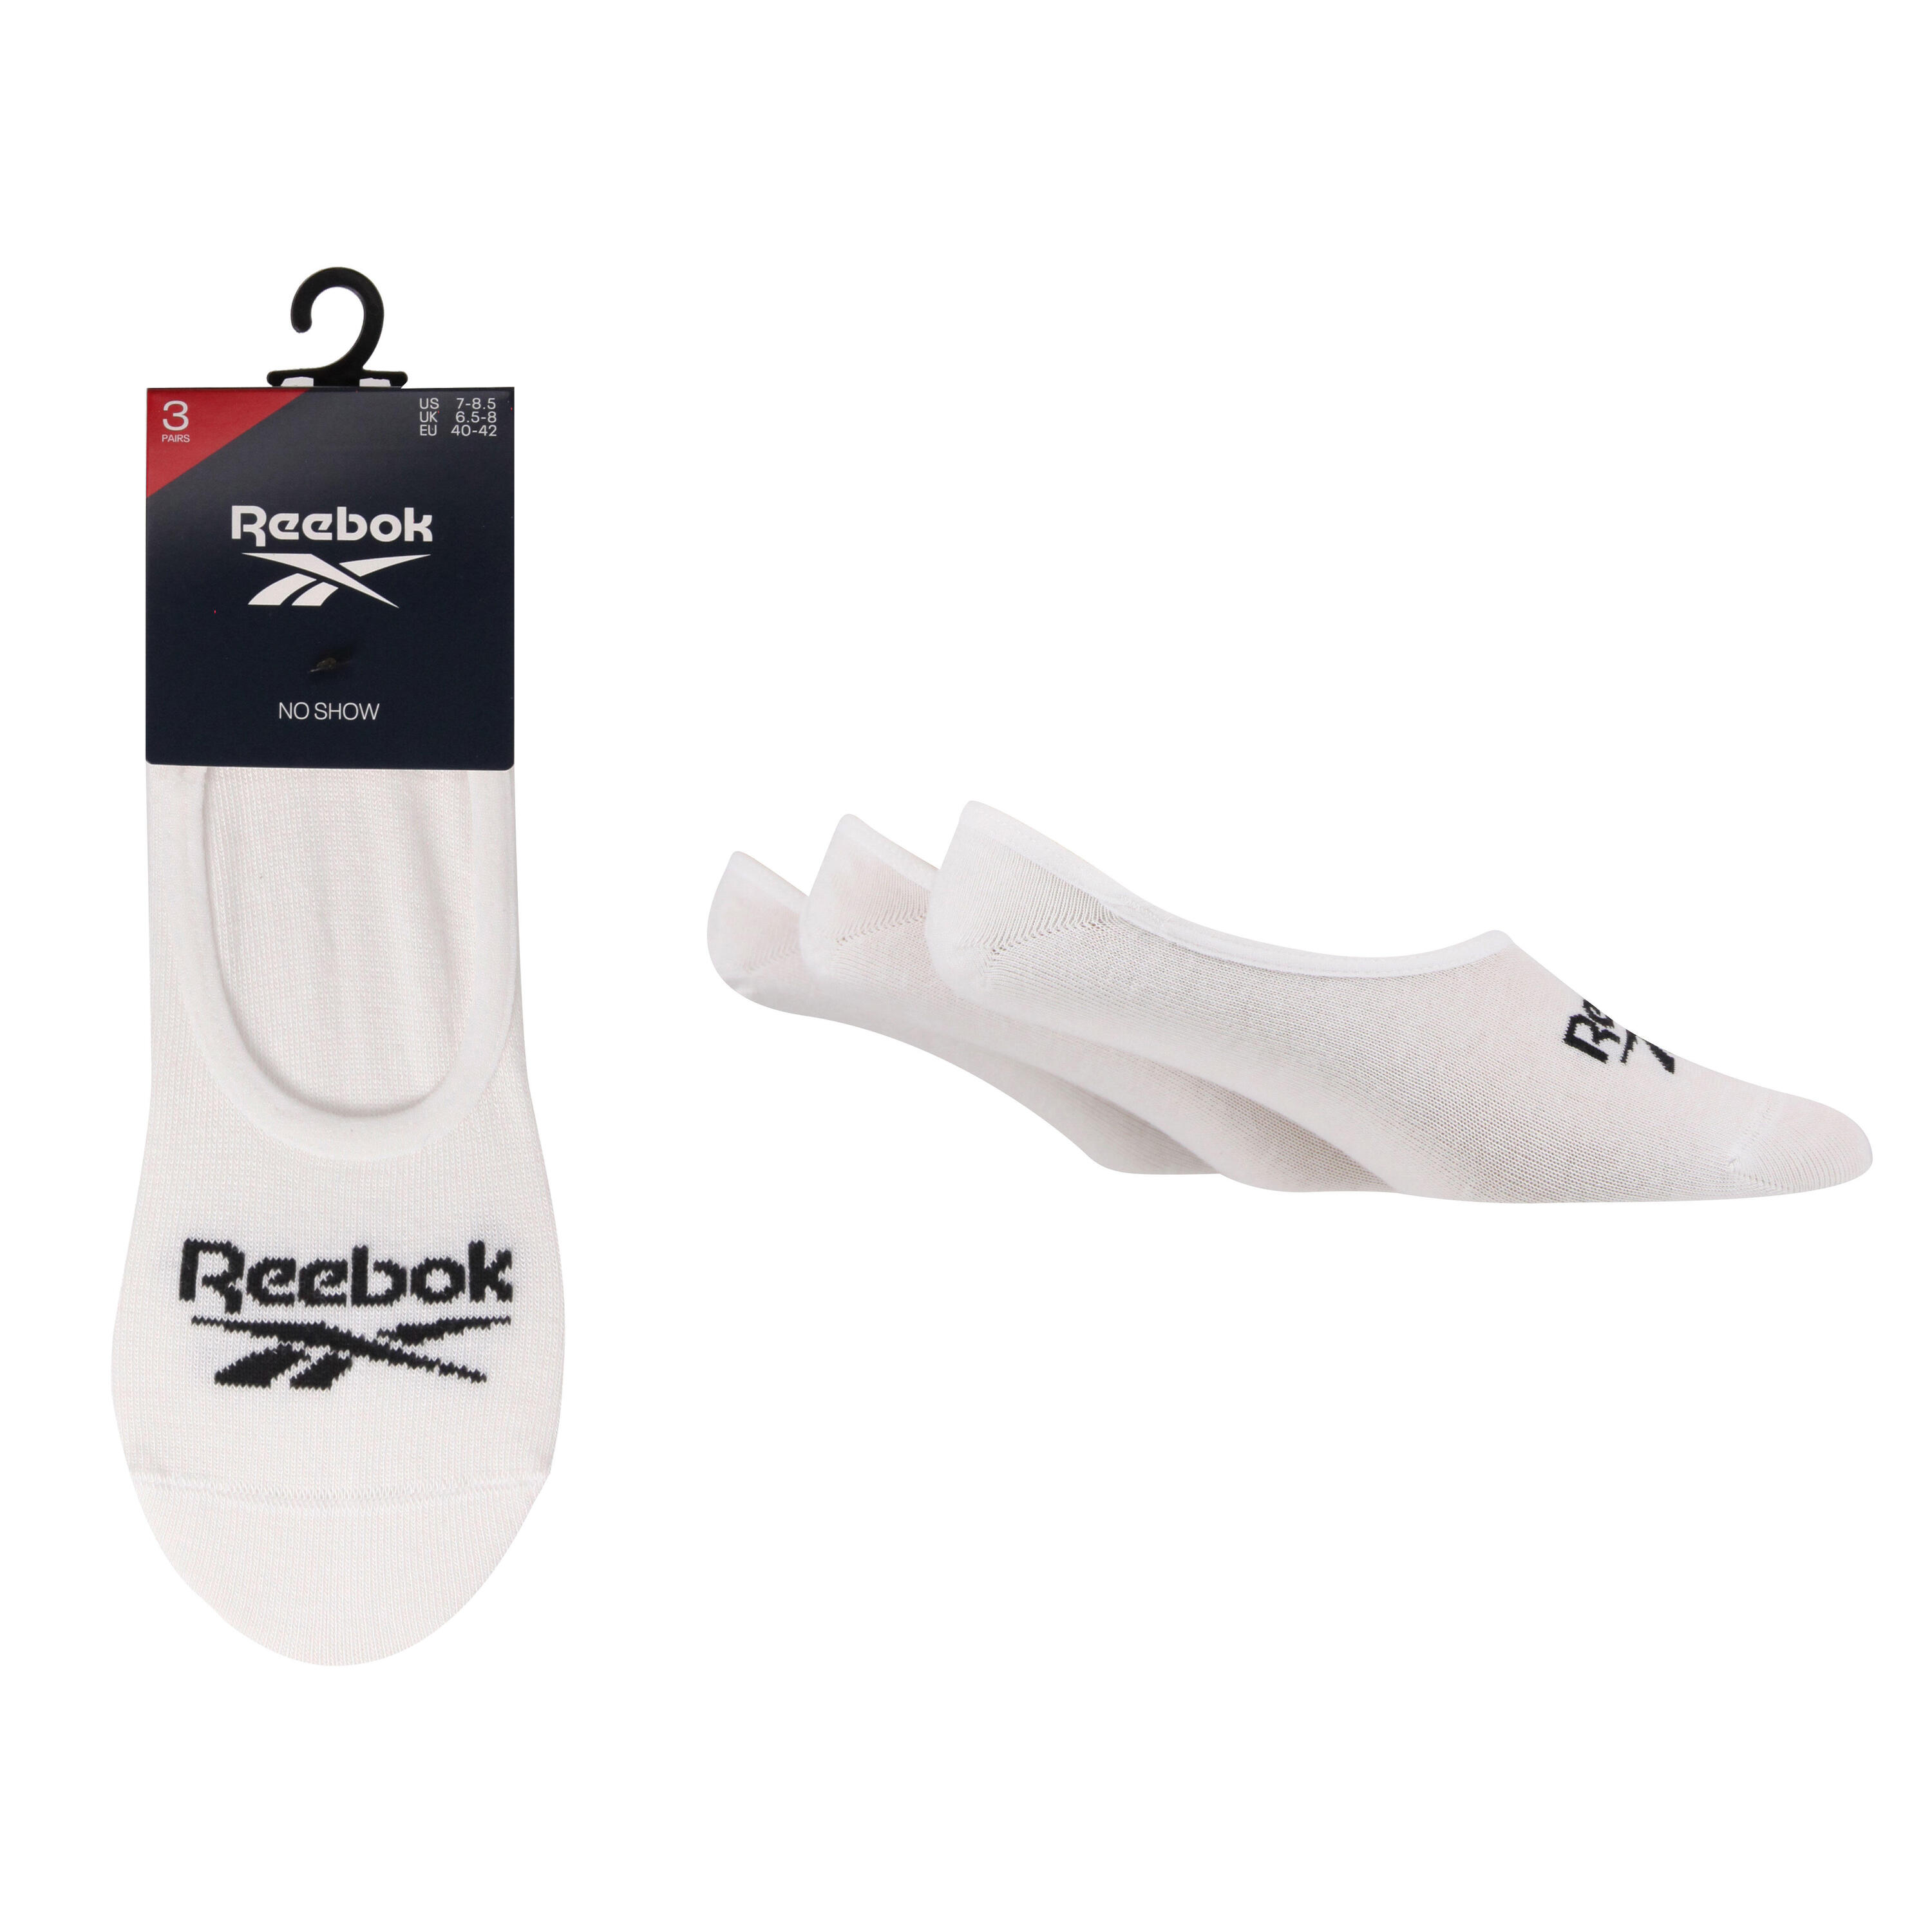 REEBOK 3 Pair Pack No Show Sports Socks With Silicon Heel Grip And Seamless Toes